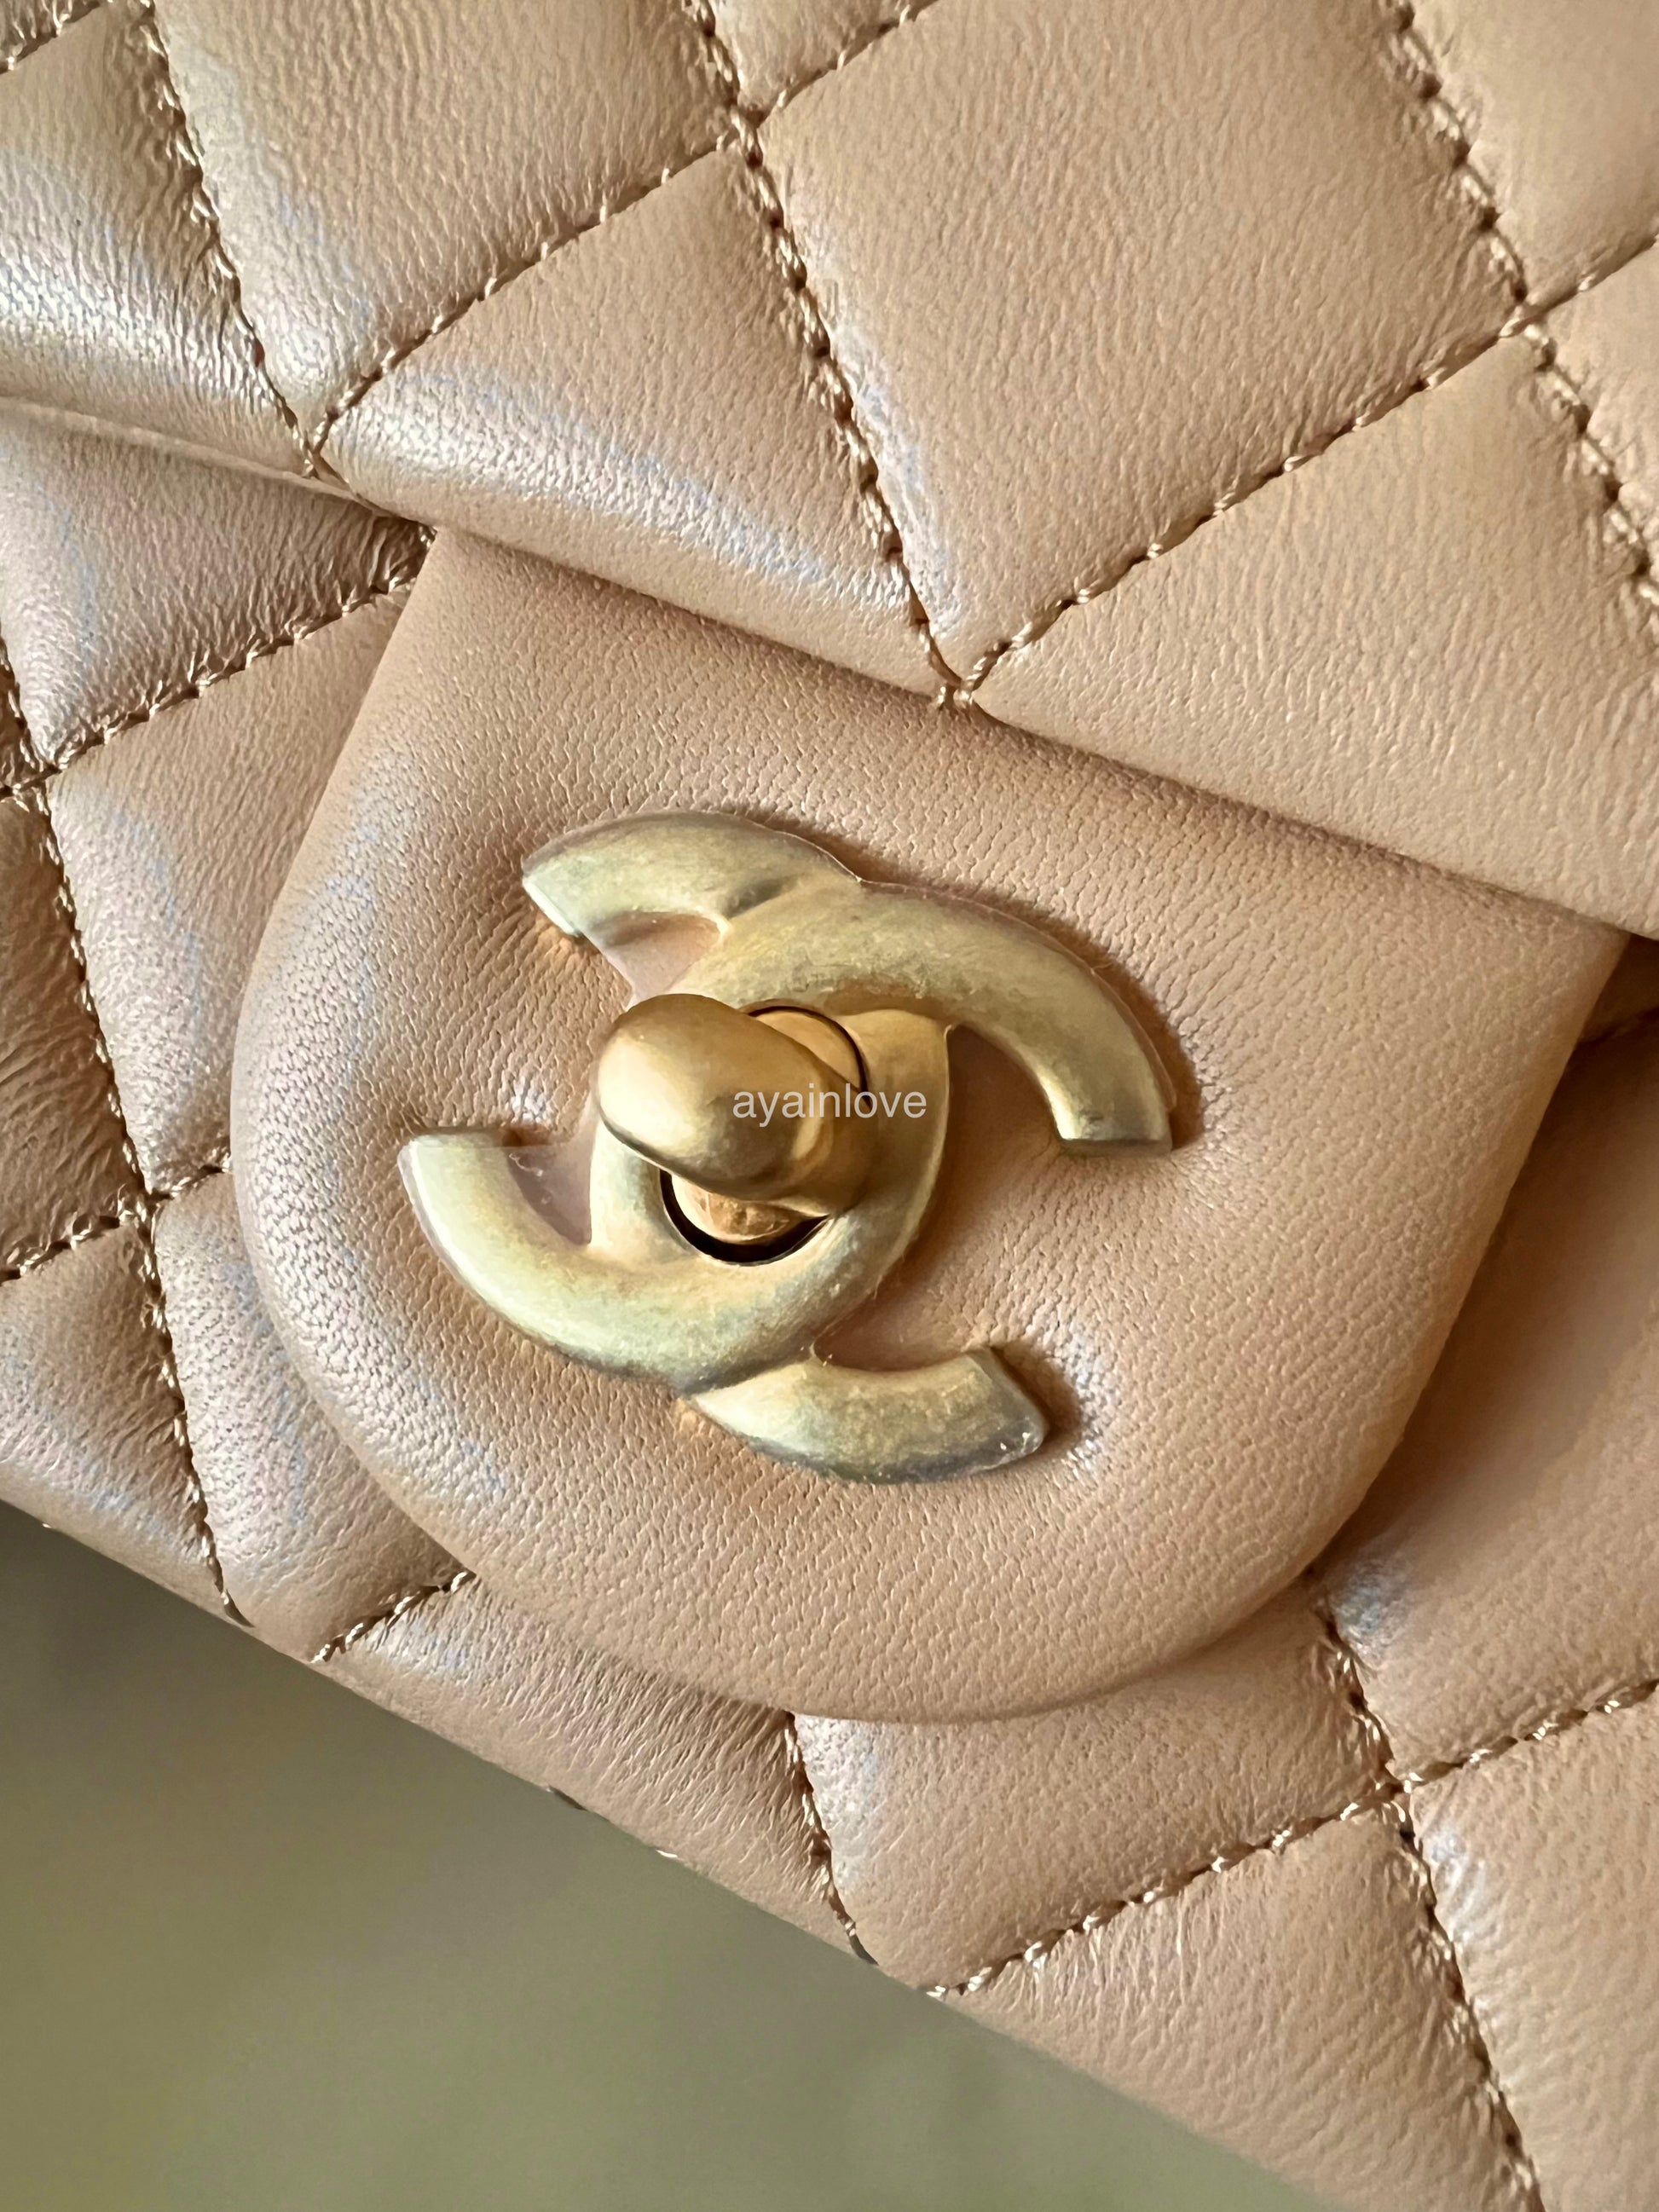 Chanel Brown Small Trendy CC Flap Bag